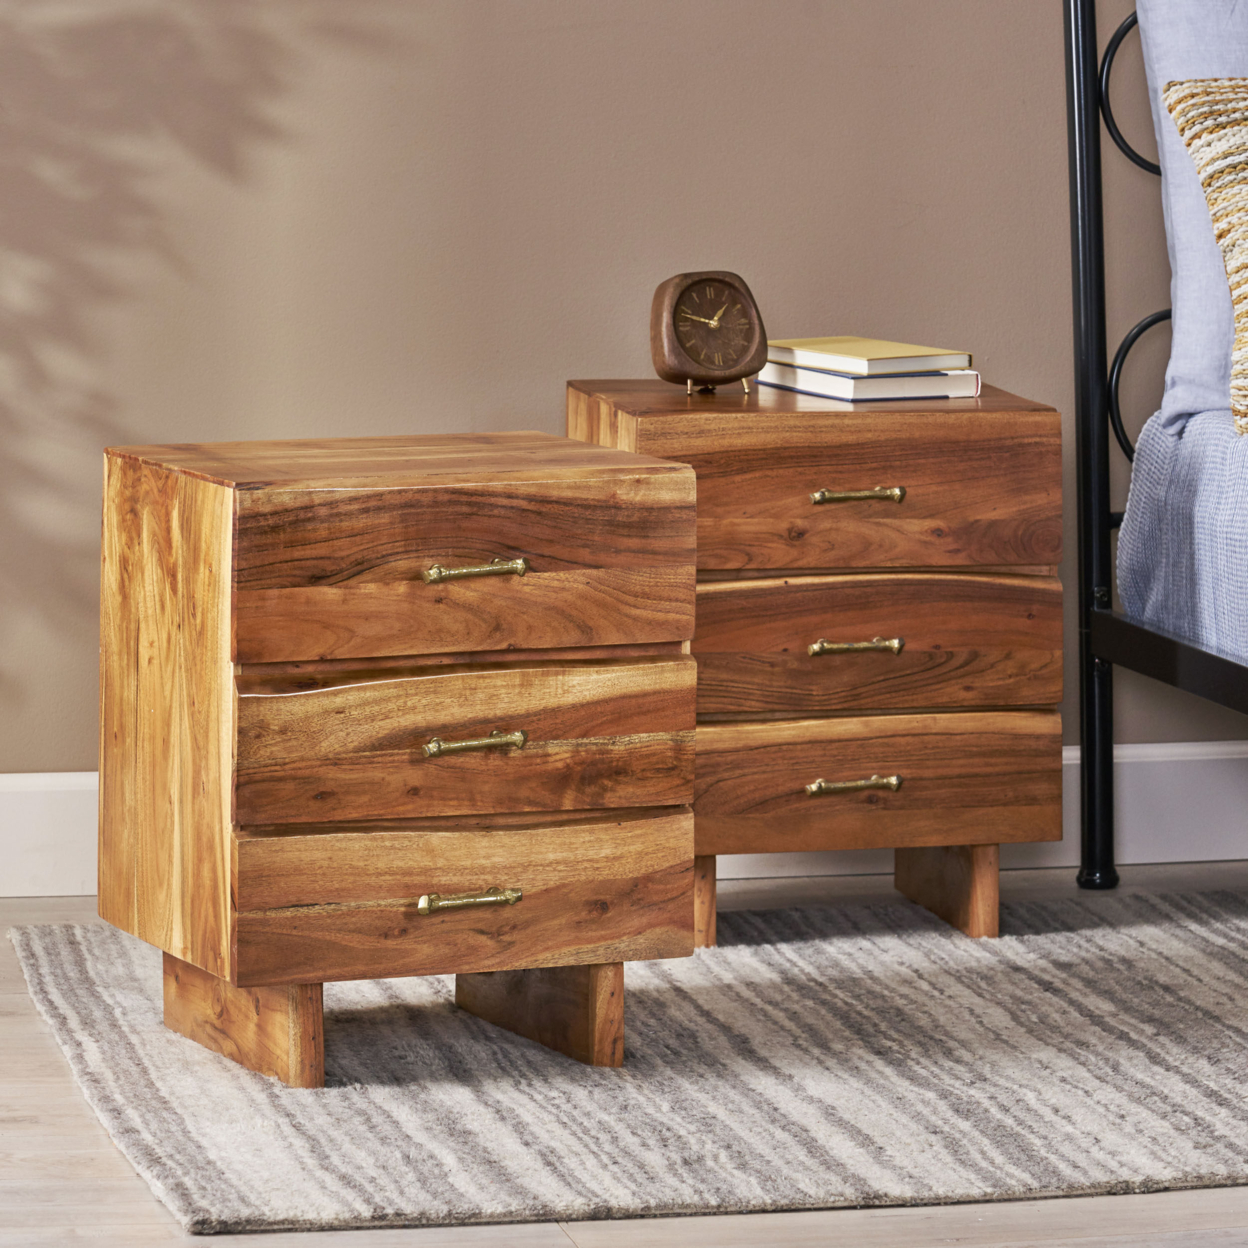 Tift Terrell Handcrafted Boho Acacia Wood 3 Drawer Nightstand (Set of 2), Dark Natural - image 2 of 7